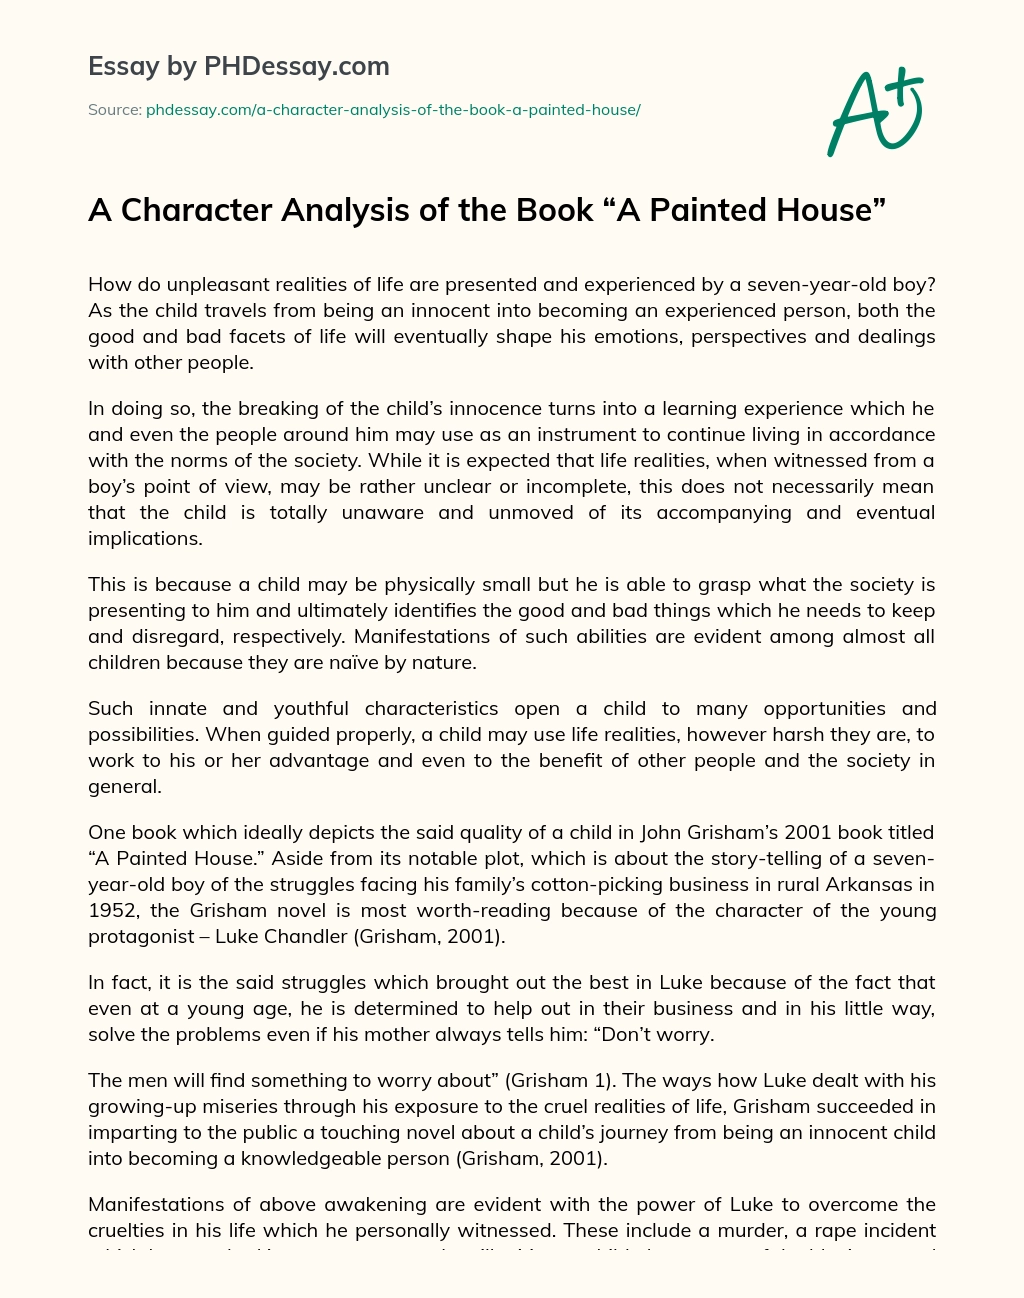 A Character Analysis of the Book “A Painted House” essay